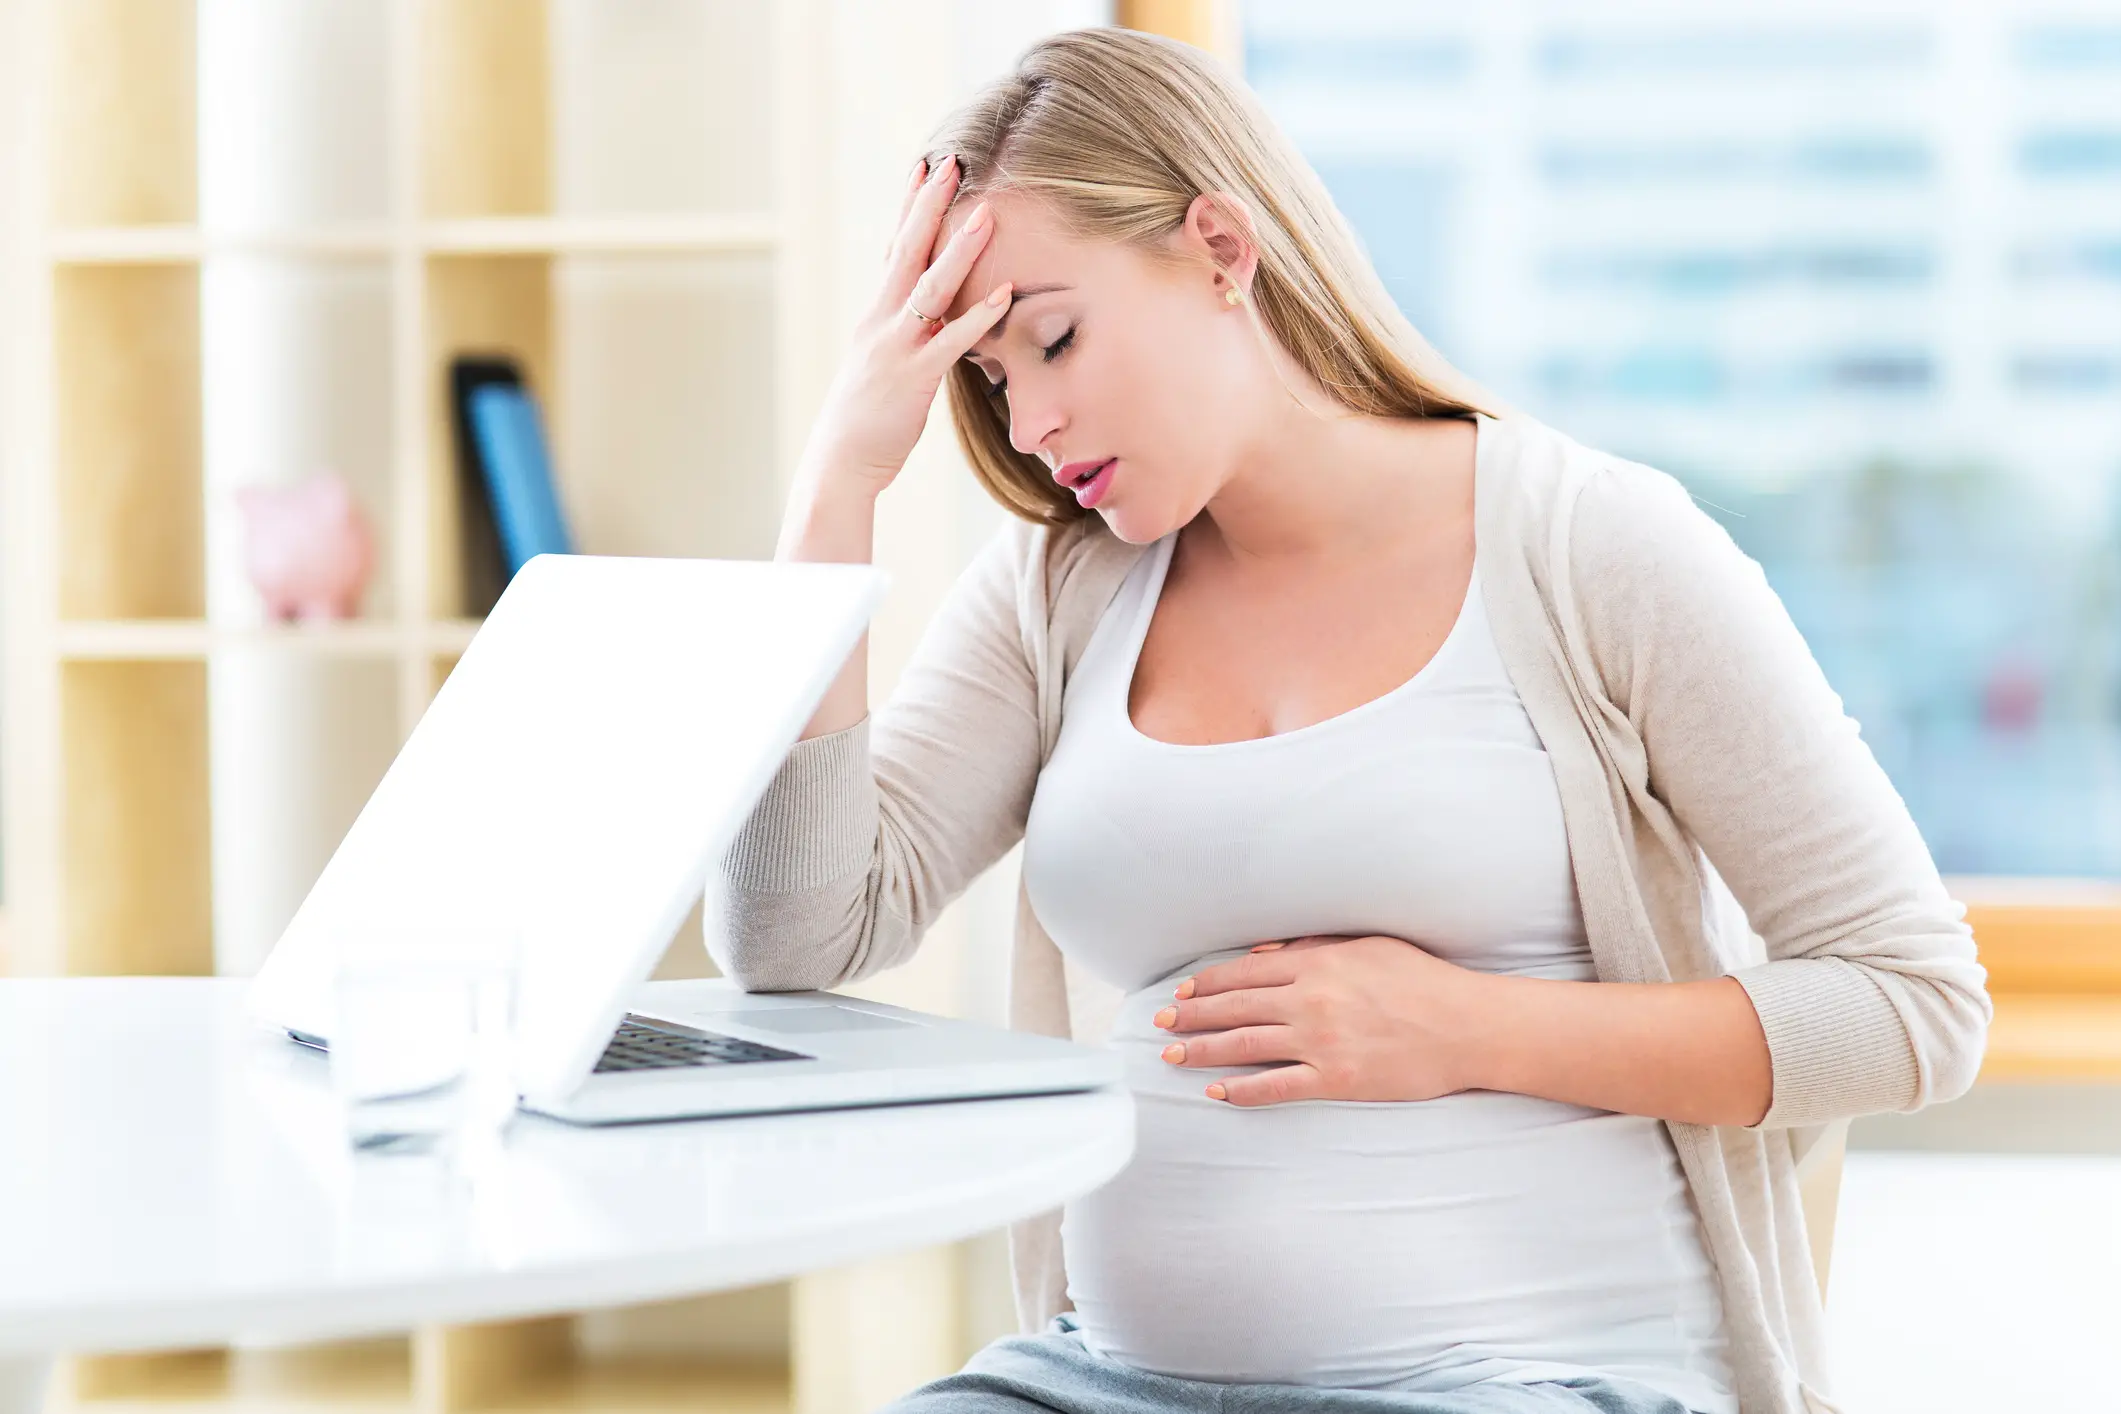 Get Relief From Headaches And Make Your Pregnancy Comfortable